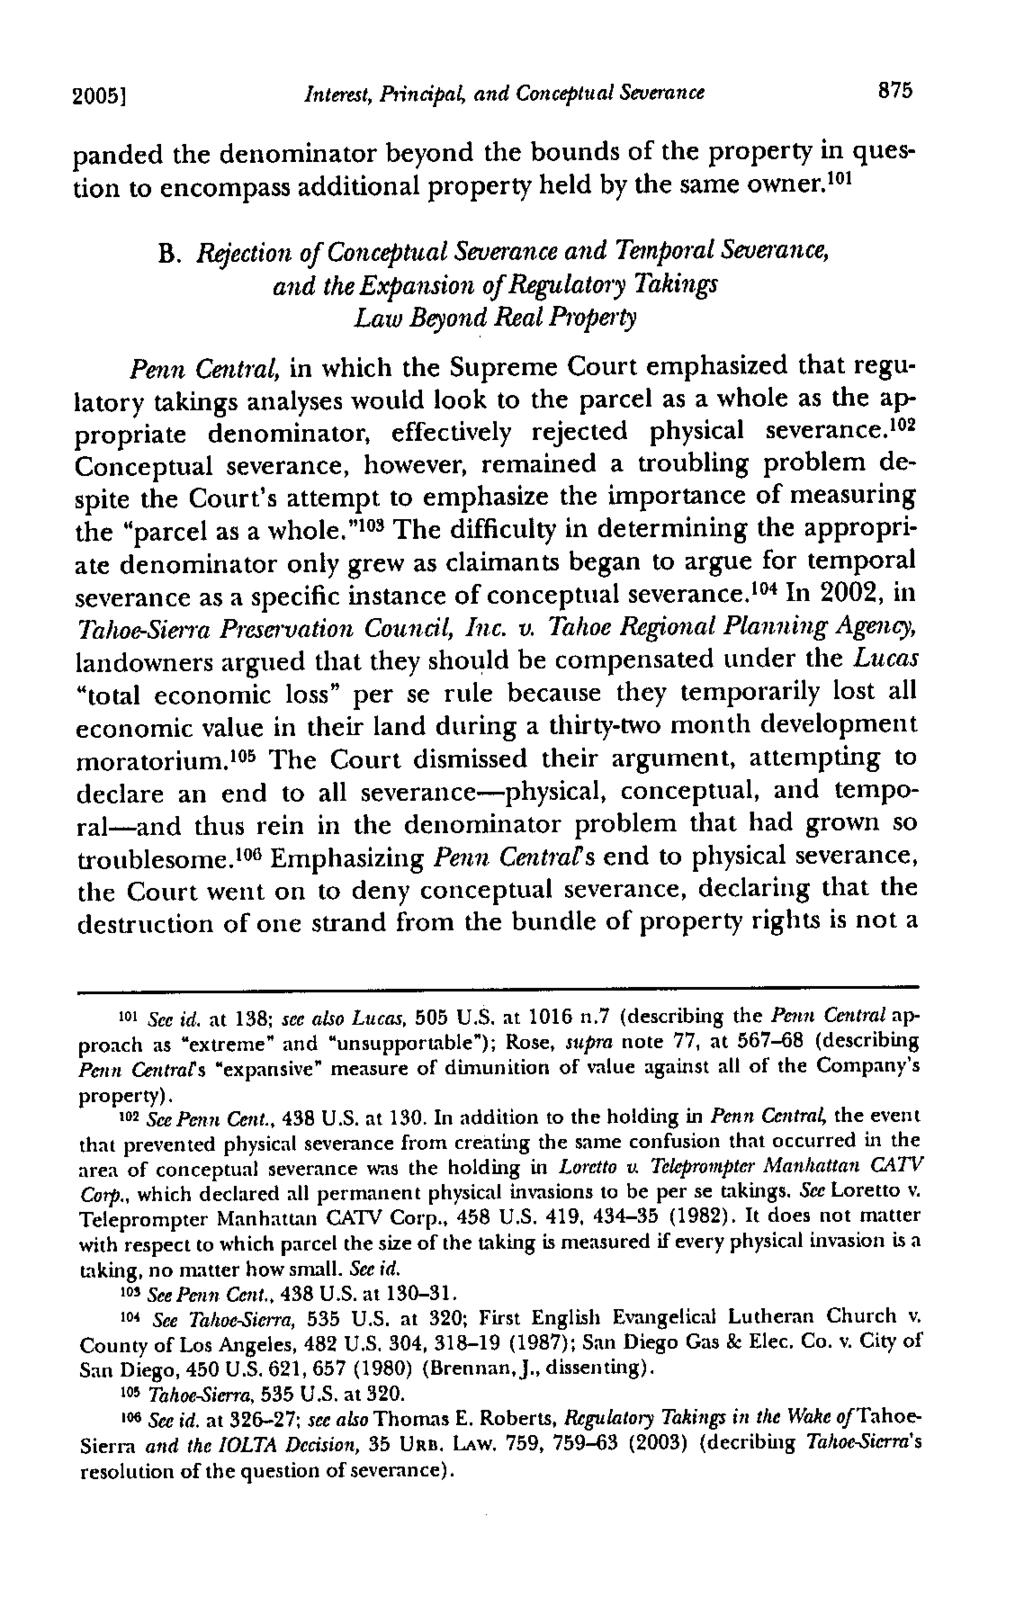 2005] Interest, Principal, and Conceptual Severance 875 panded the denominator beyond the bounds of the property in quesdon to encompass additional property held by the same owner," 1 B.